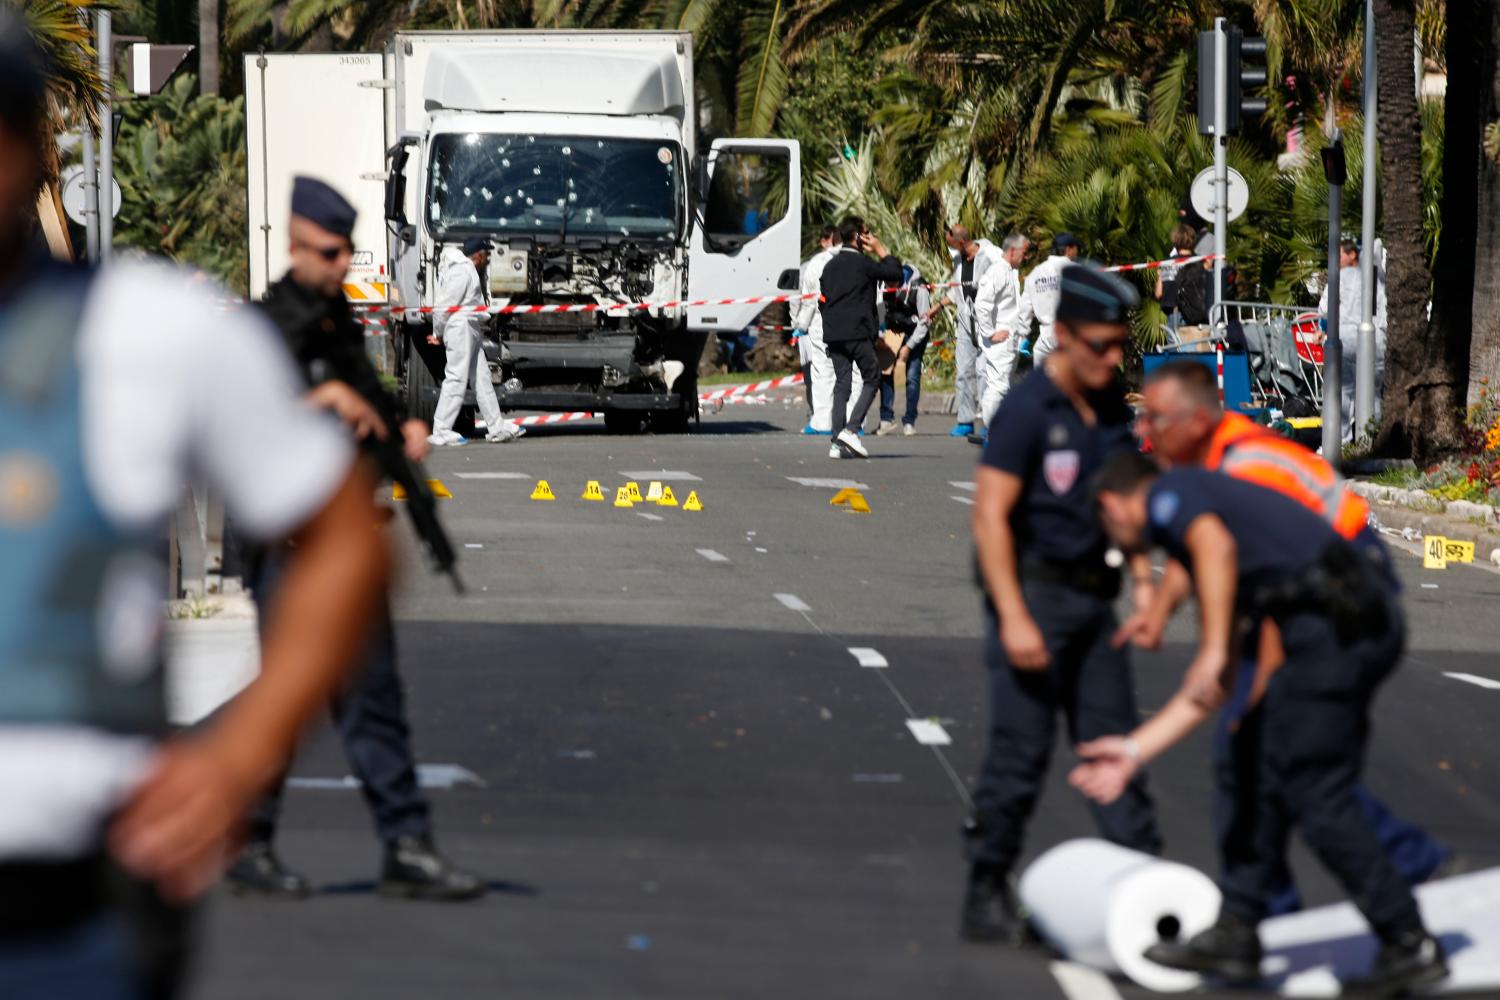 French police secure the area as the investigation continues at the scene near the heavy truck that ran into a crowd at high speed killing scores who were celebrating the Bastille Day July 14 national holiday on the Promenade des Anglais in Nice, France, July 15, 2016. REUTERS/Eric Gaillard - RTSI28V